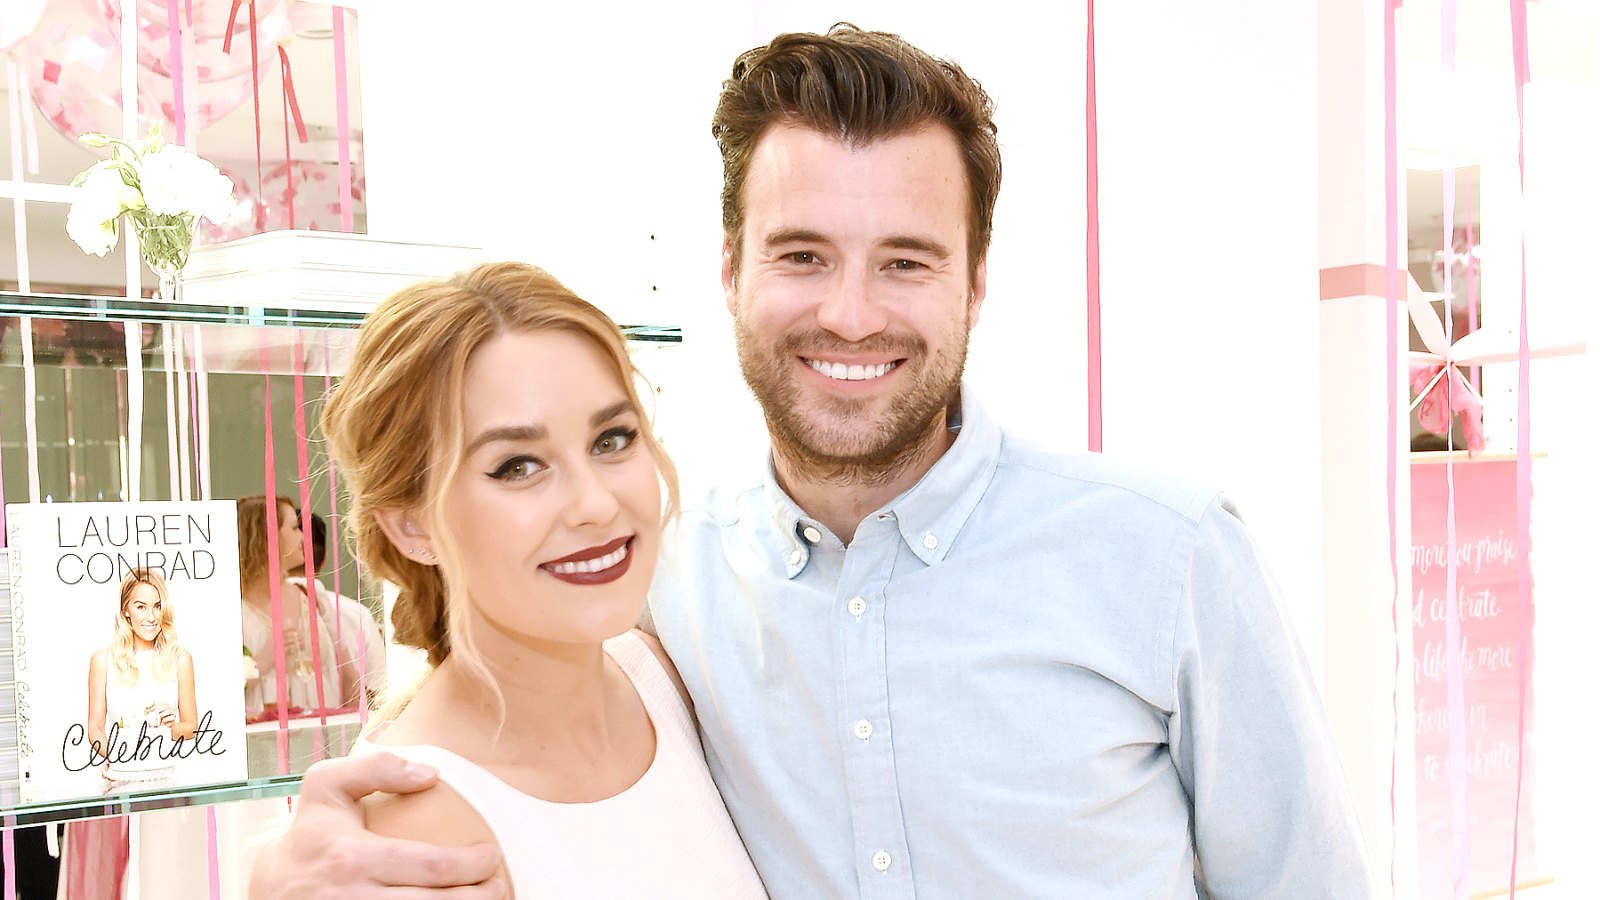 Lauren Conrad and William Tell attend the "Lauren Conrad Celebrate" book launch party at Kohl's Showroom on March 23, 2016 in New York City.